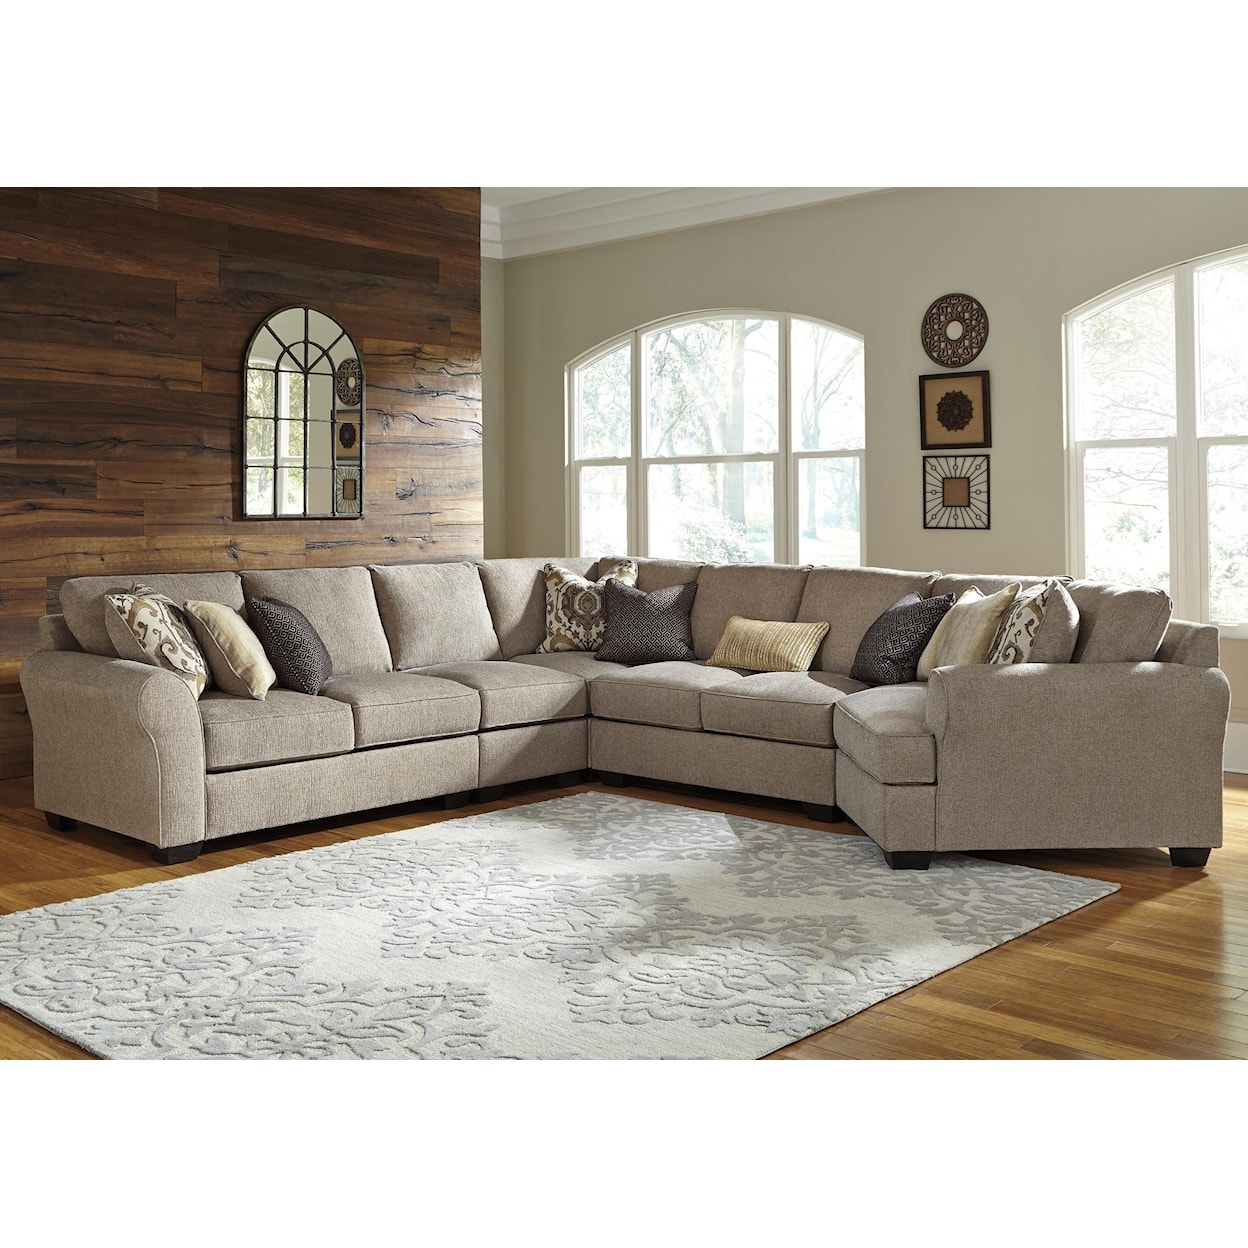 Ashley Furniture Benchcraft Pantomine 5-Piece Sectional with Cuddler